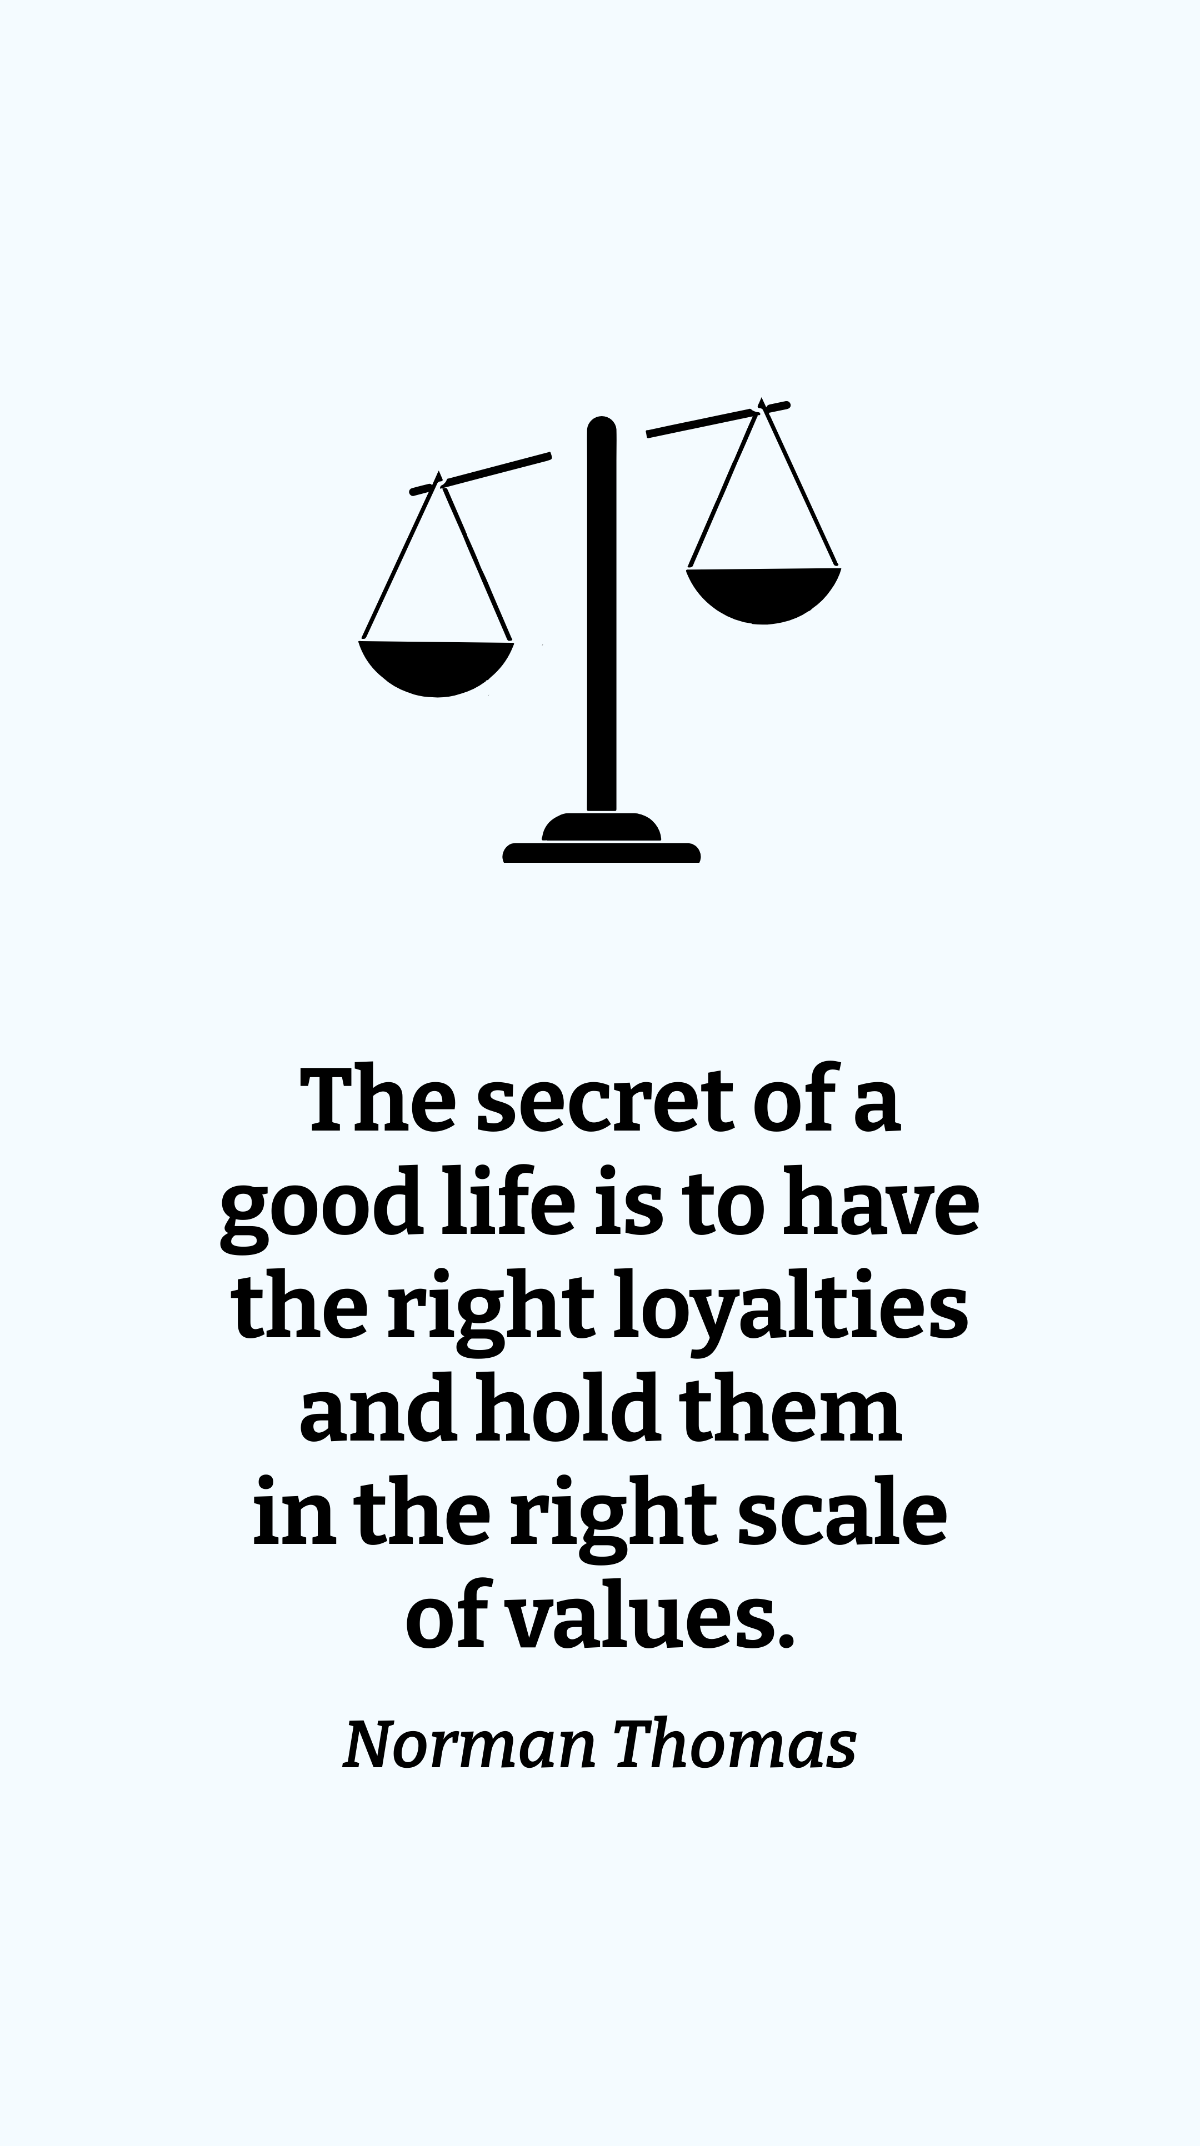 Norman Thomas - The secret of a good life is to have the right loyalties and hold them in the right scale of values. Template